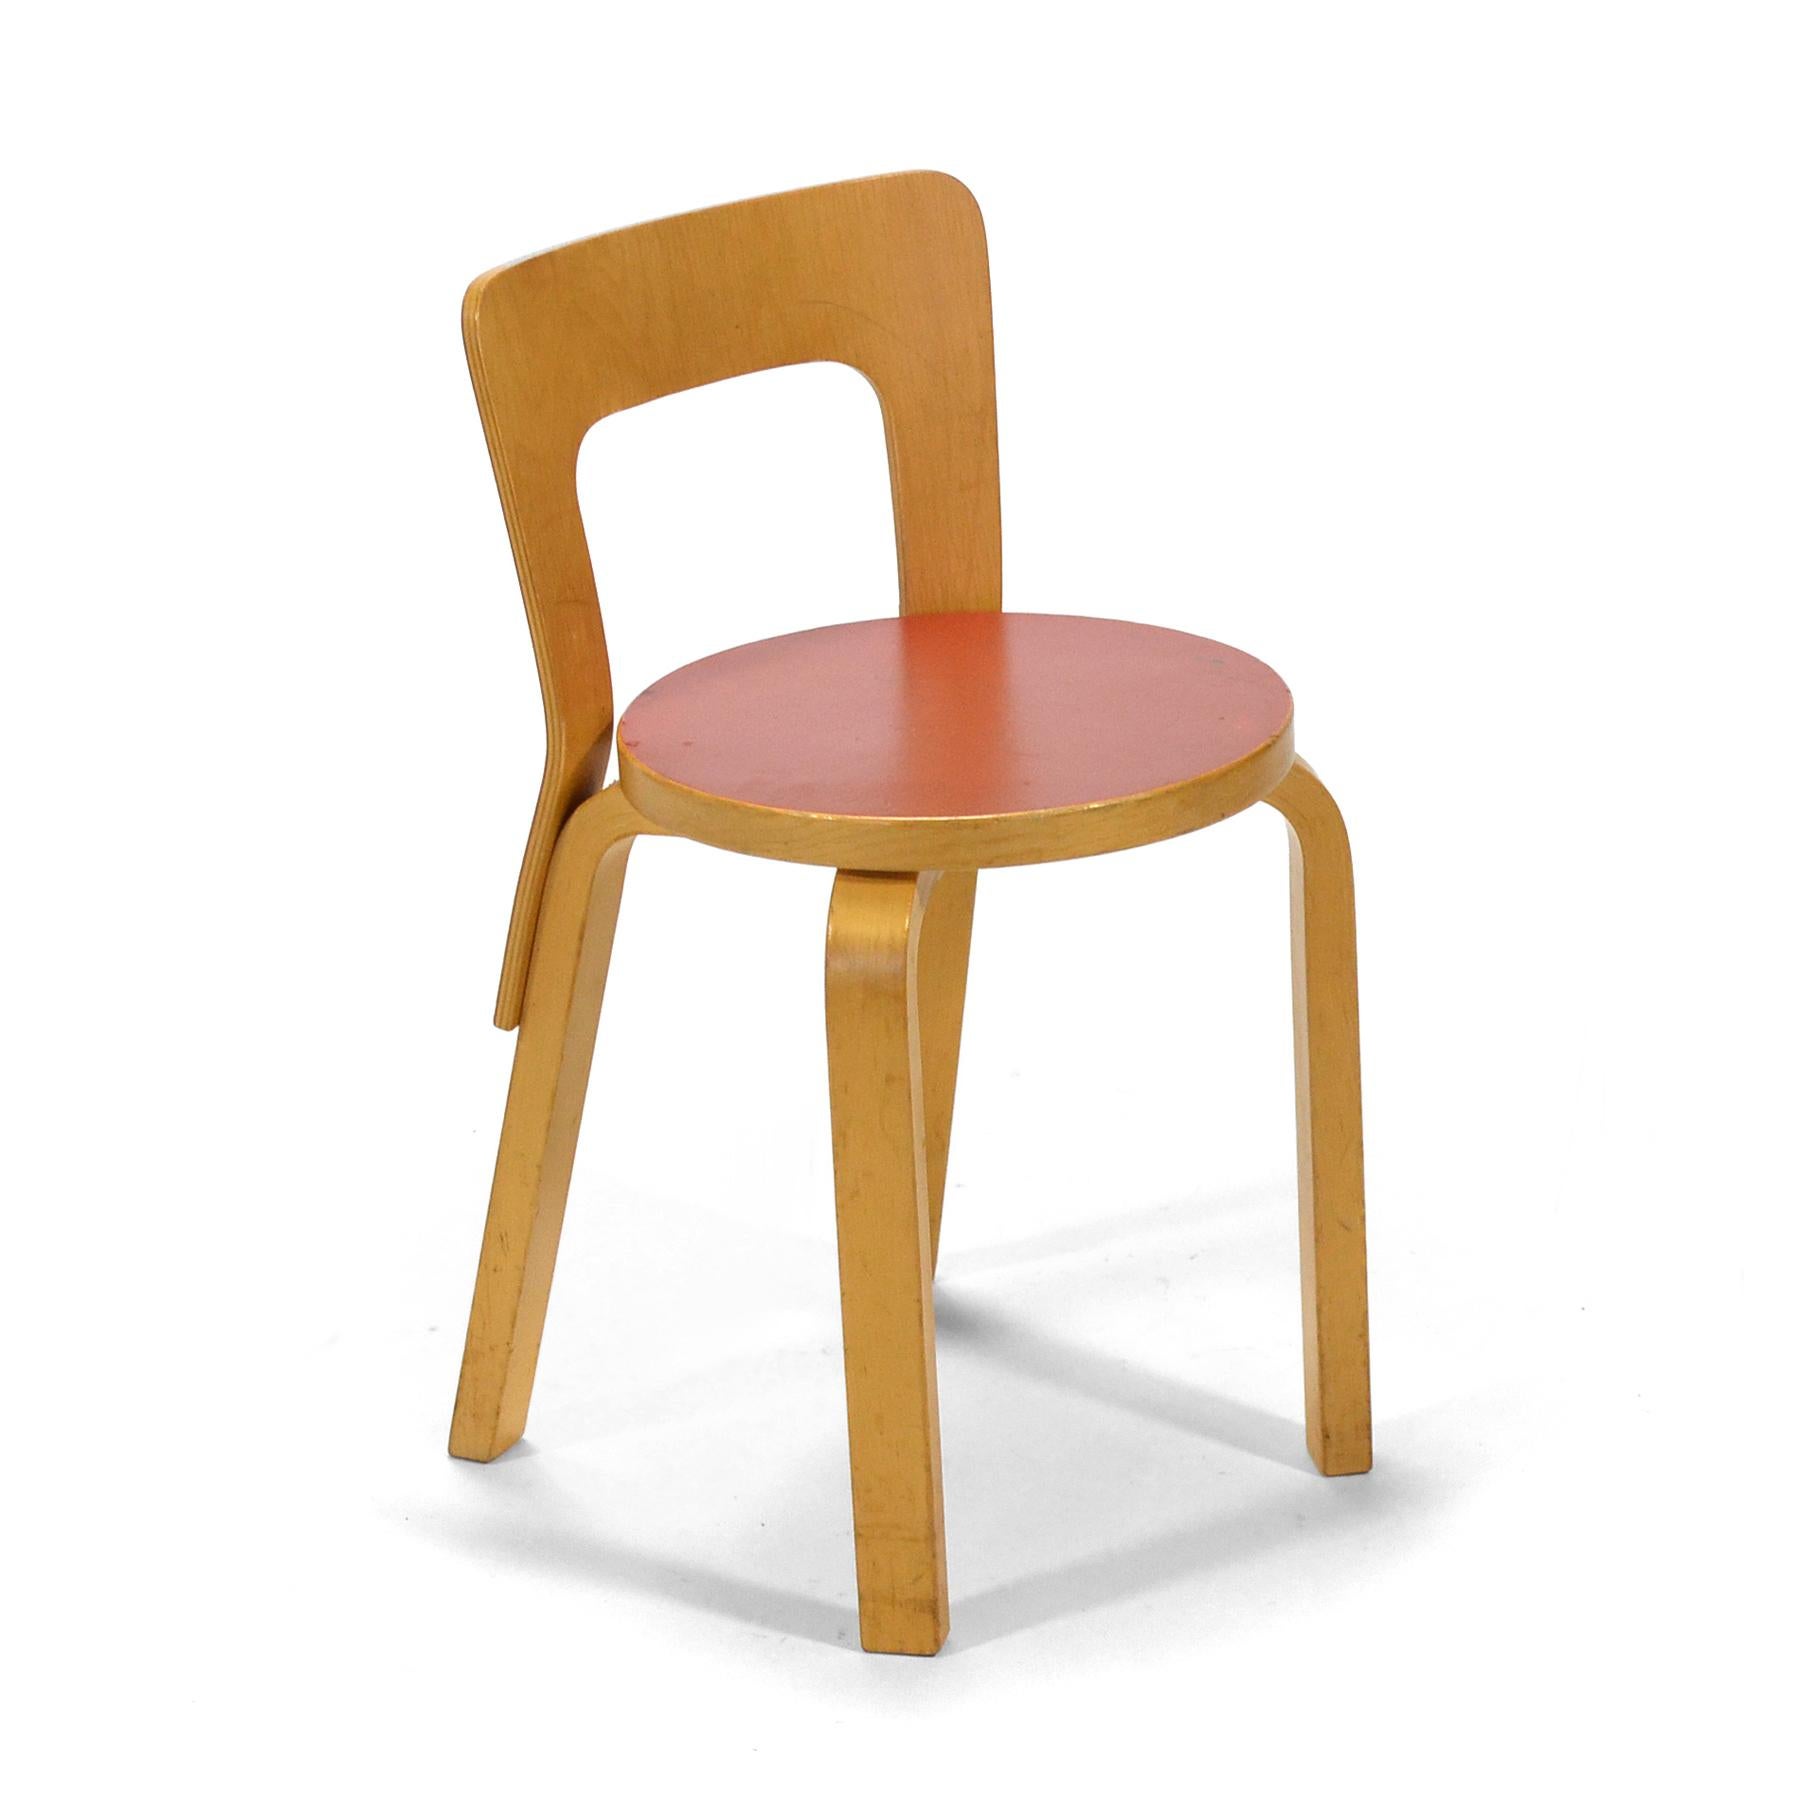 A diminutive chair perfect for children, the 65 chair is a Classic Aalto design with his signature bentwood legs, round seat with red top and plywood back. This vintage example has a beautiful patina from age and use.